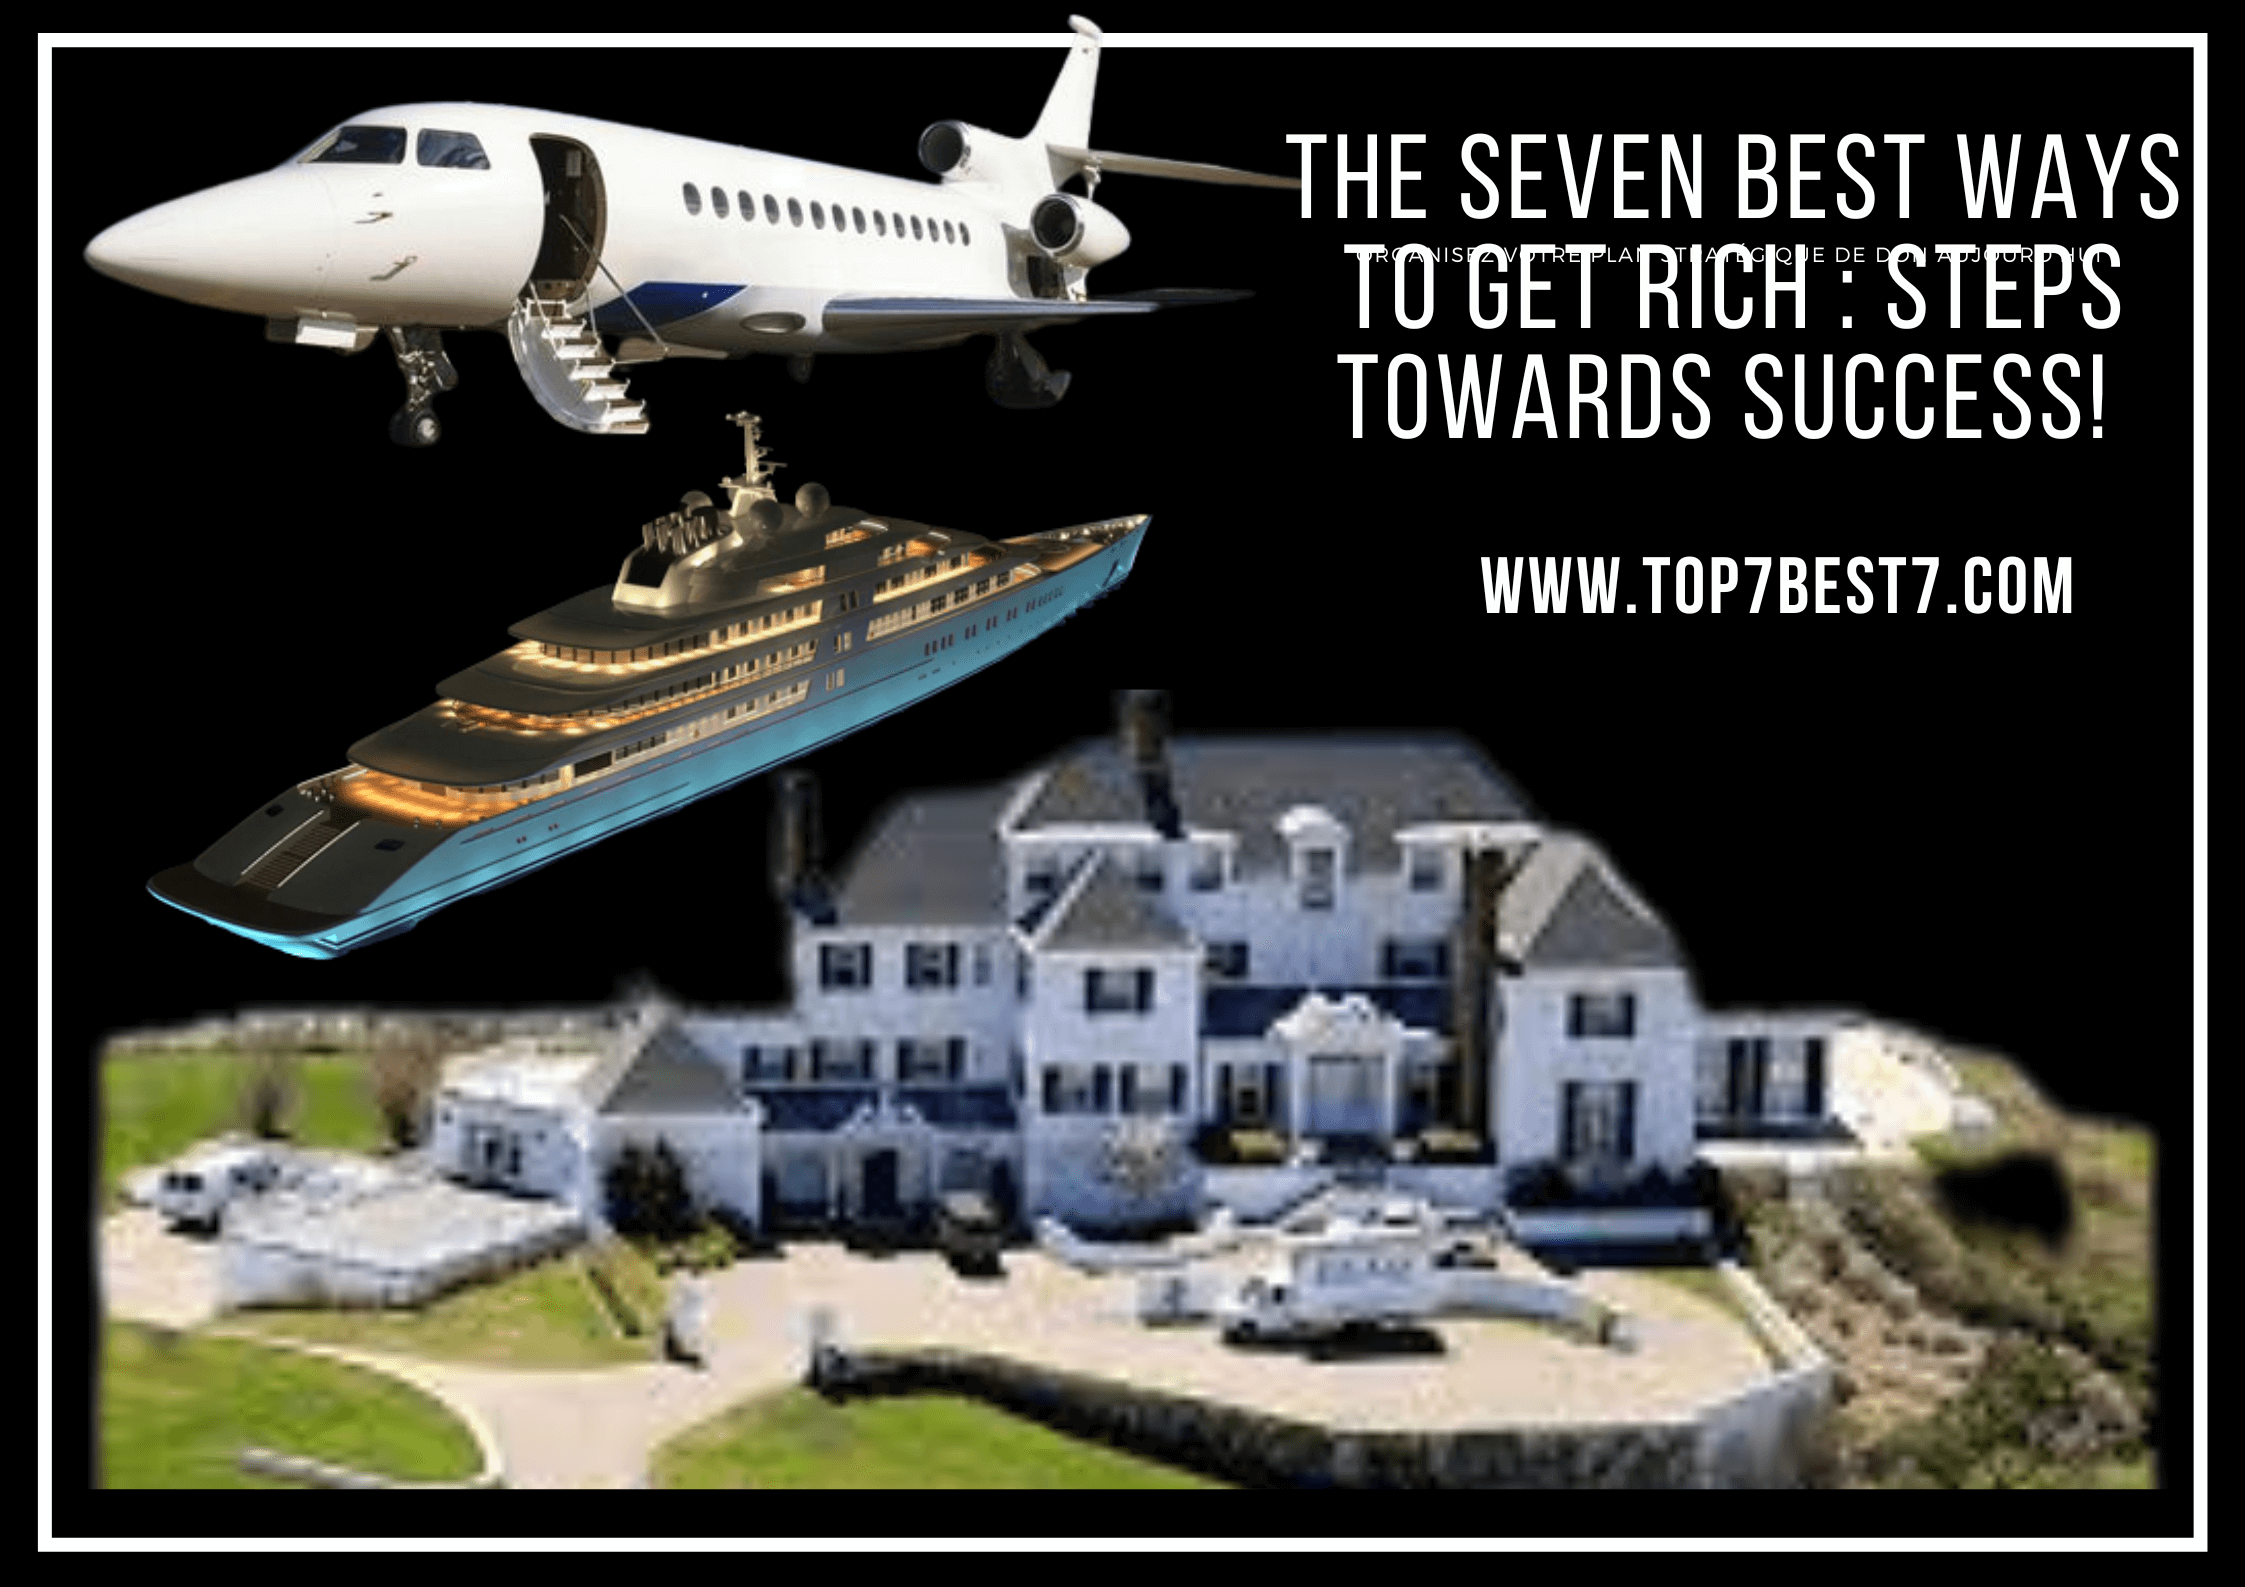 You are currently viewing The Seven Best Ways to Get Rich : Steps towards success